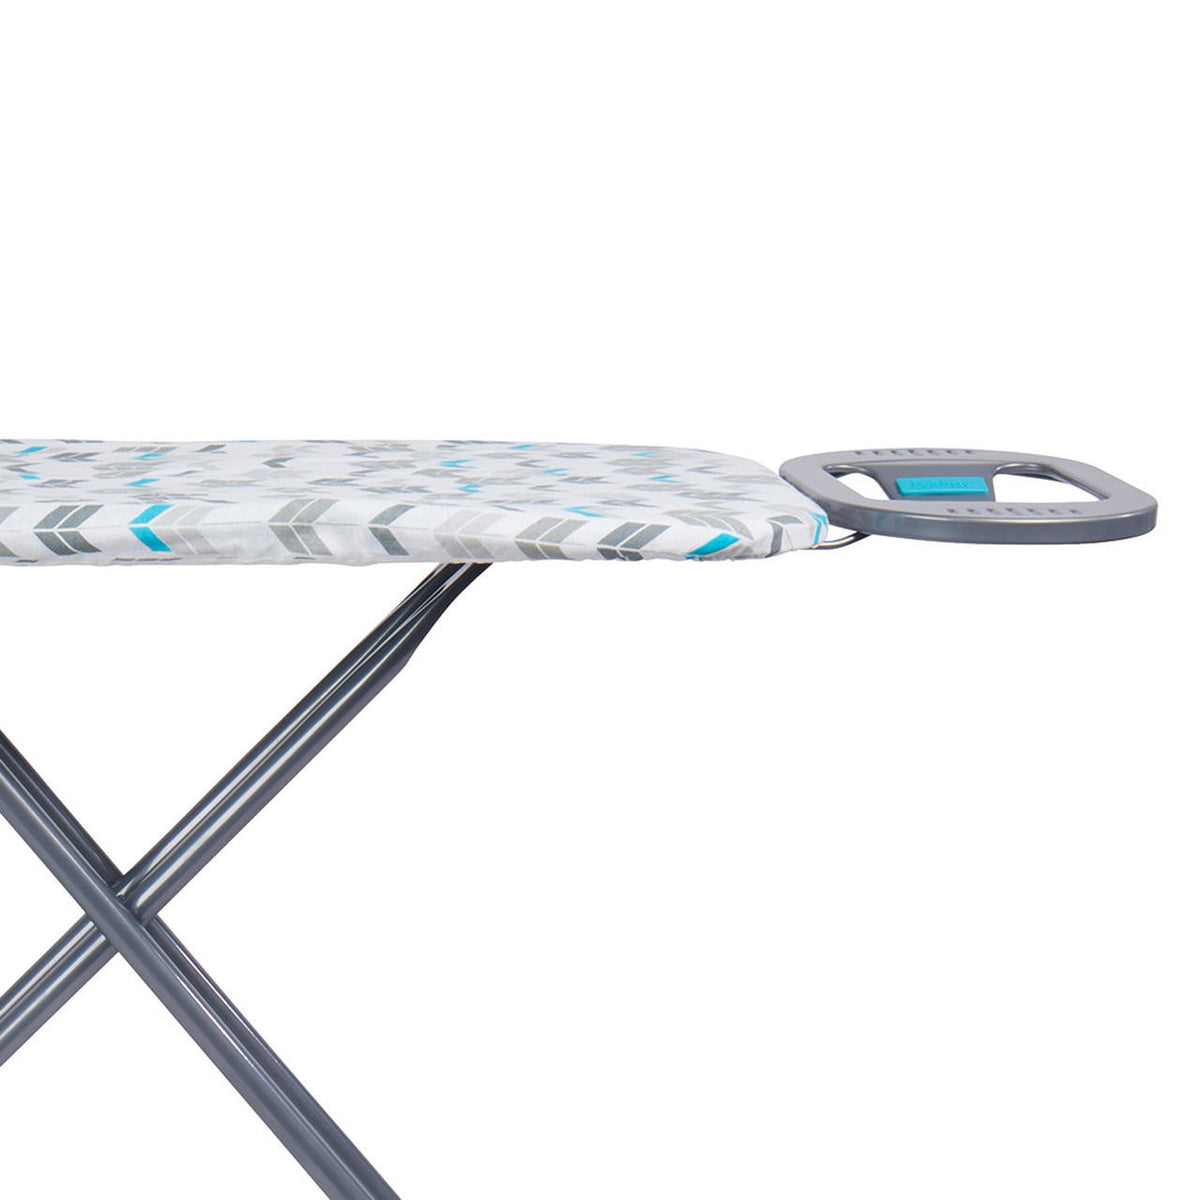 Beldray 137 x 38cm Adjustable Iron Rest Ironing Board - Grey/Turquoise | LA024398AREWU7 from Beldray - DID Electrical